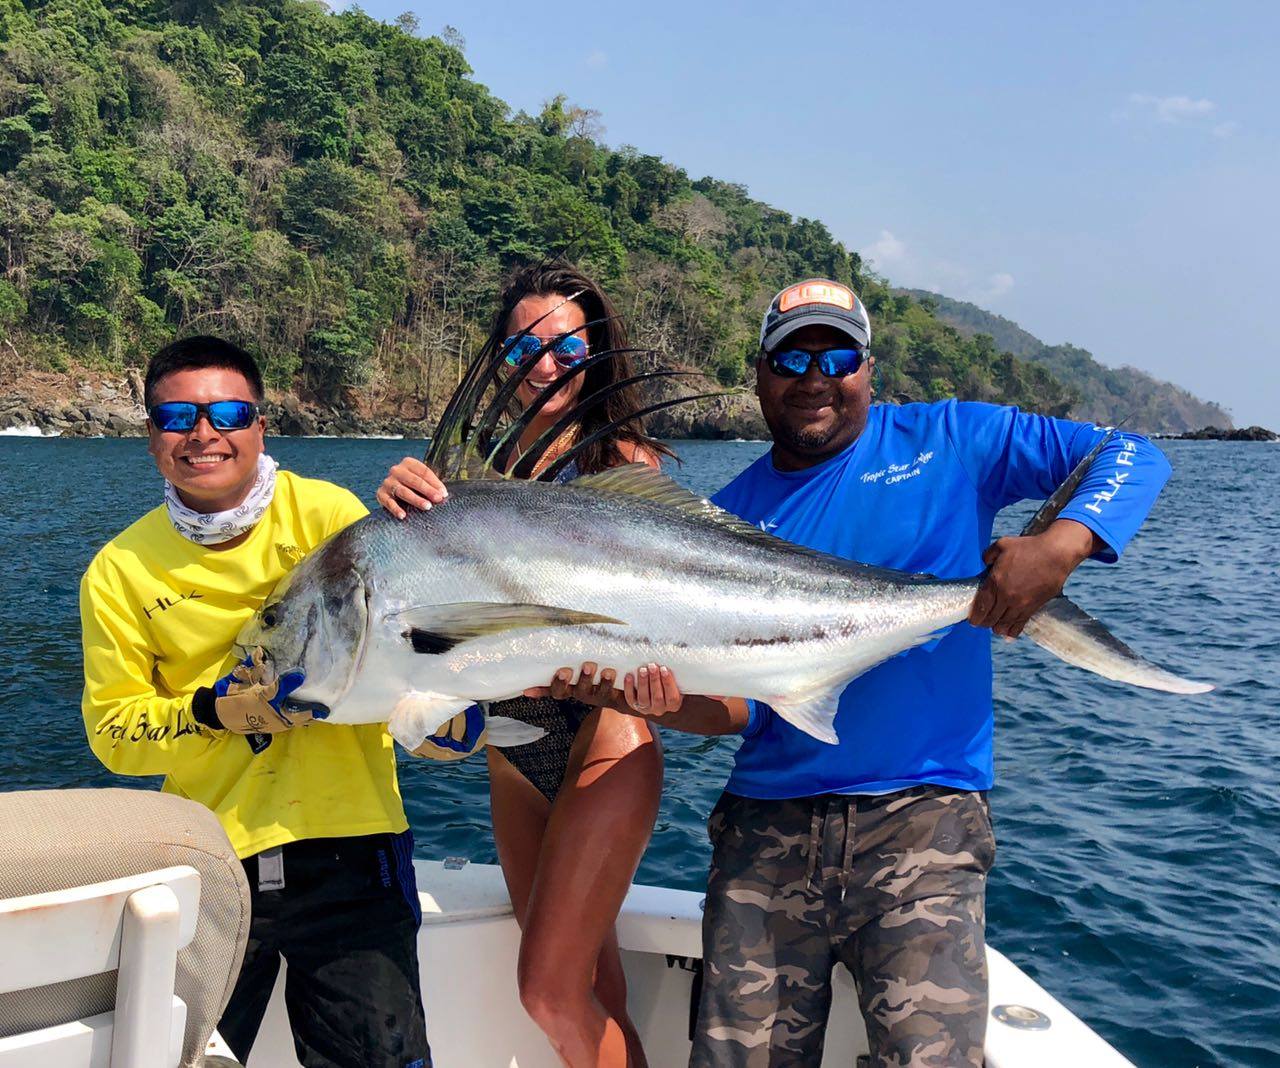 Tropic Star Lodge on X: The inshore fishing at Tropic Star Lodge has been  keeping our guests busy with bent rods and screaming reels. Special deals  for select April & May trips